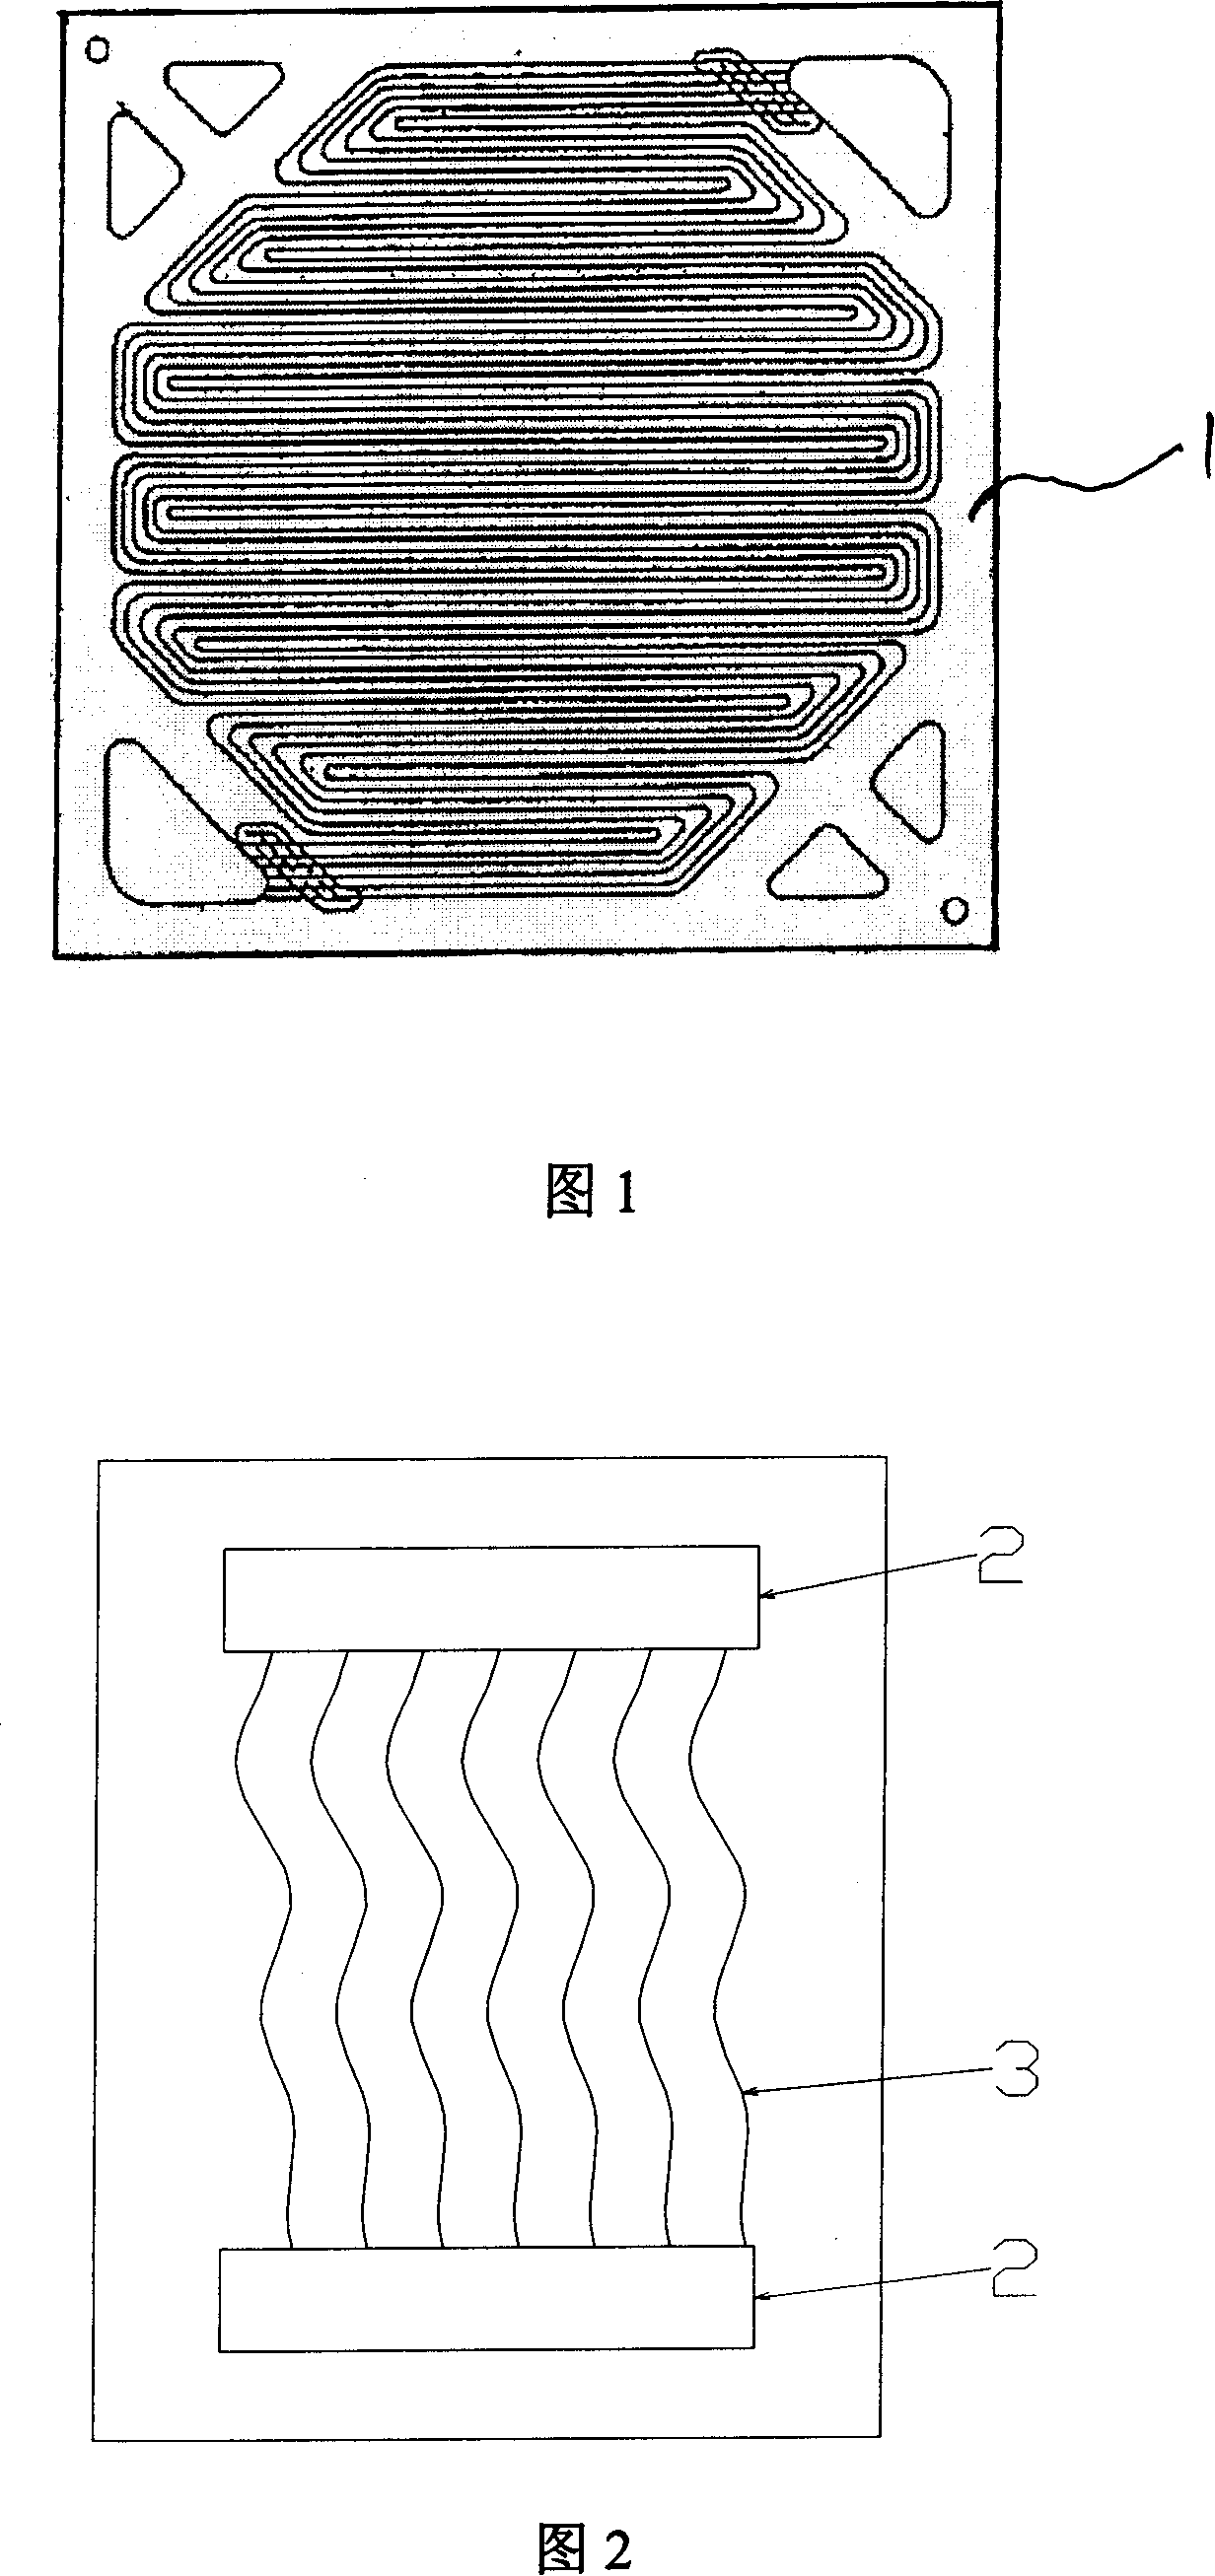 A fuel battery flow guiding polarized plate without water blockage